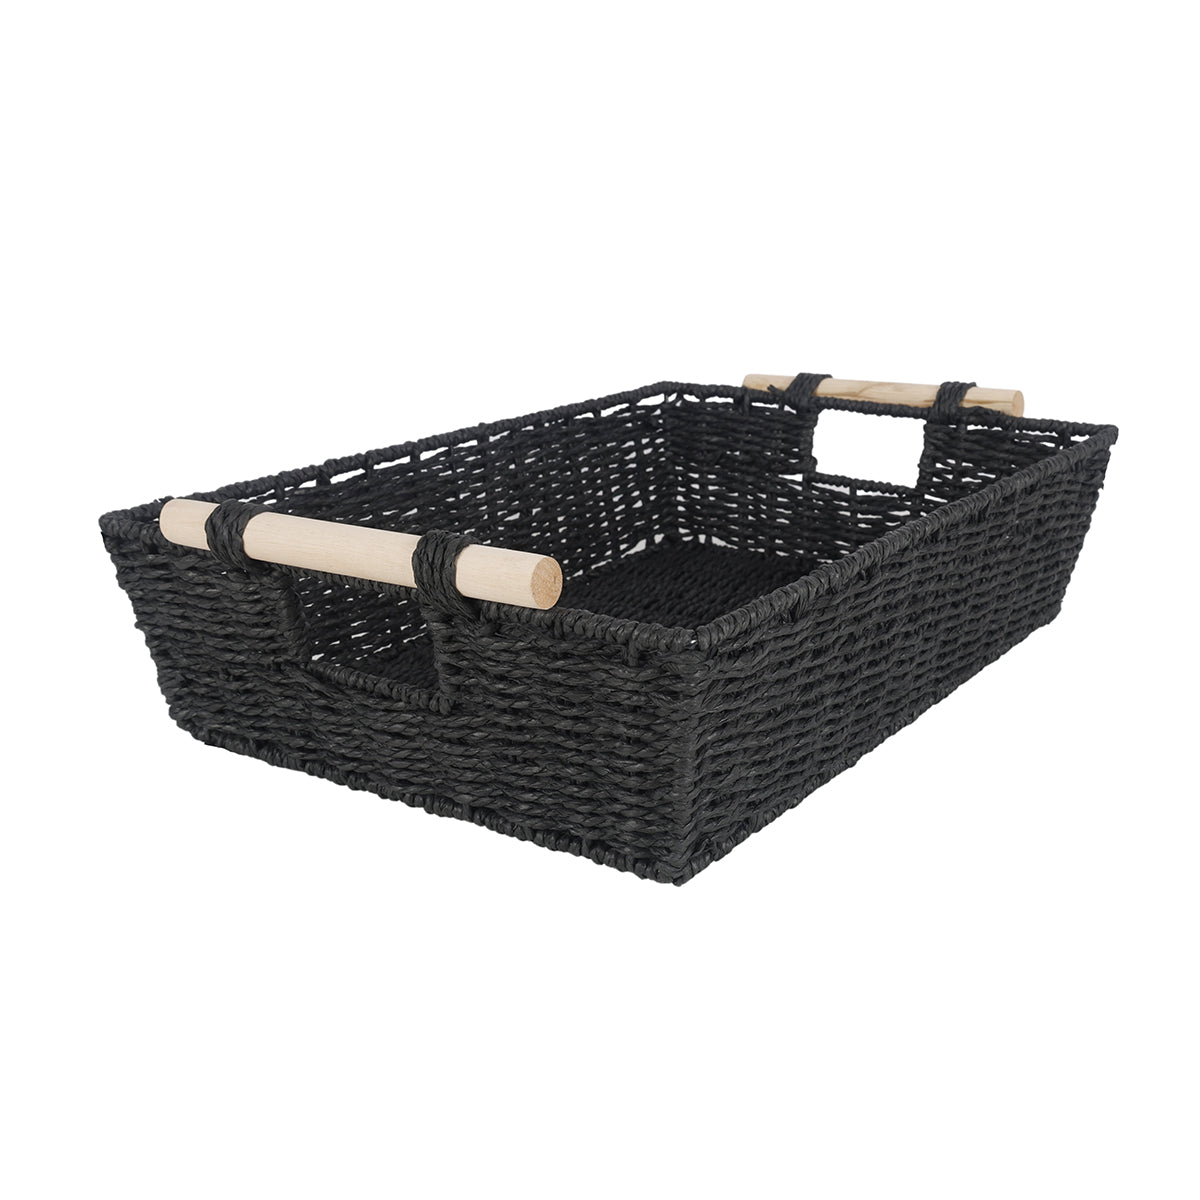 Cercy Paper Rope Organiser Black With Wooden Handle 46 x 33 x 11 cm